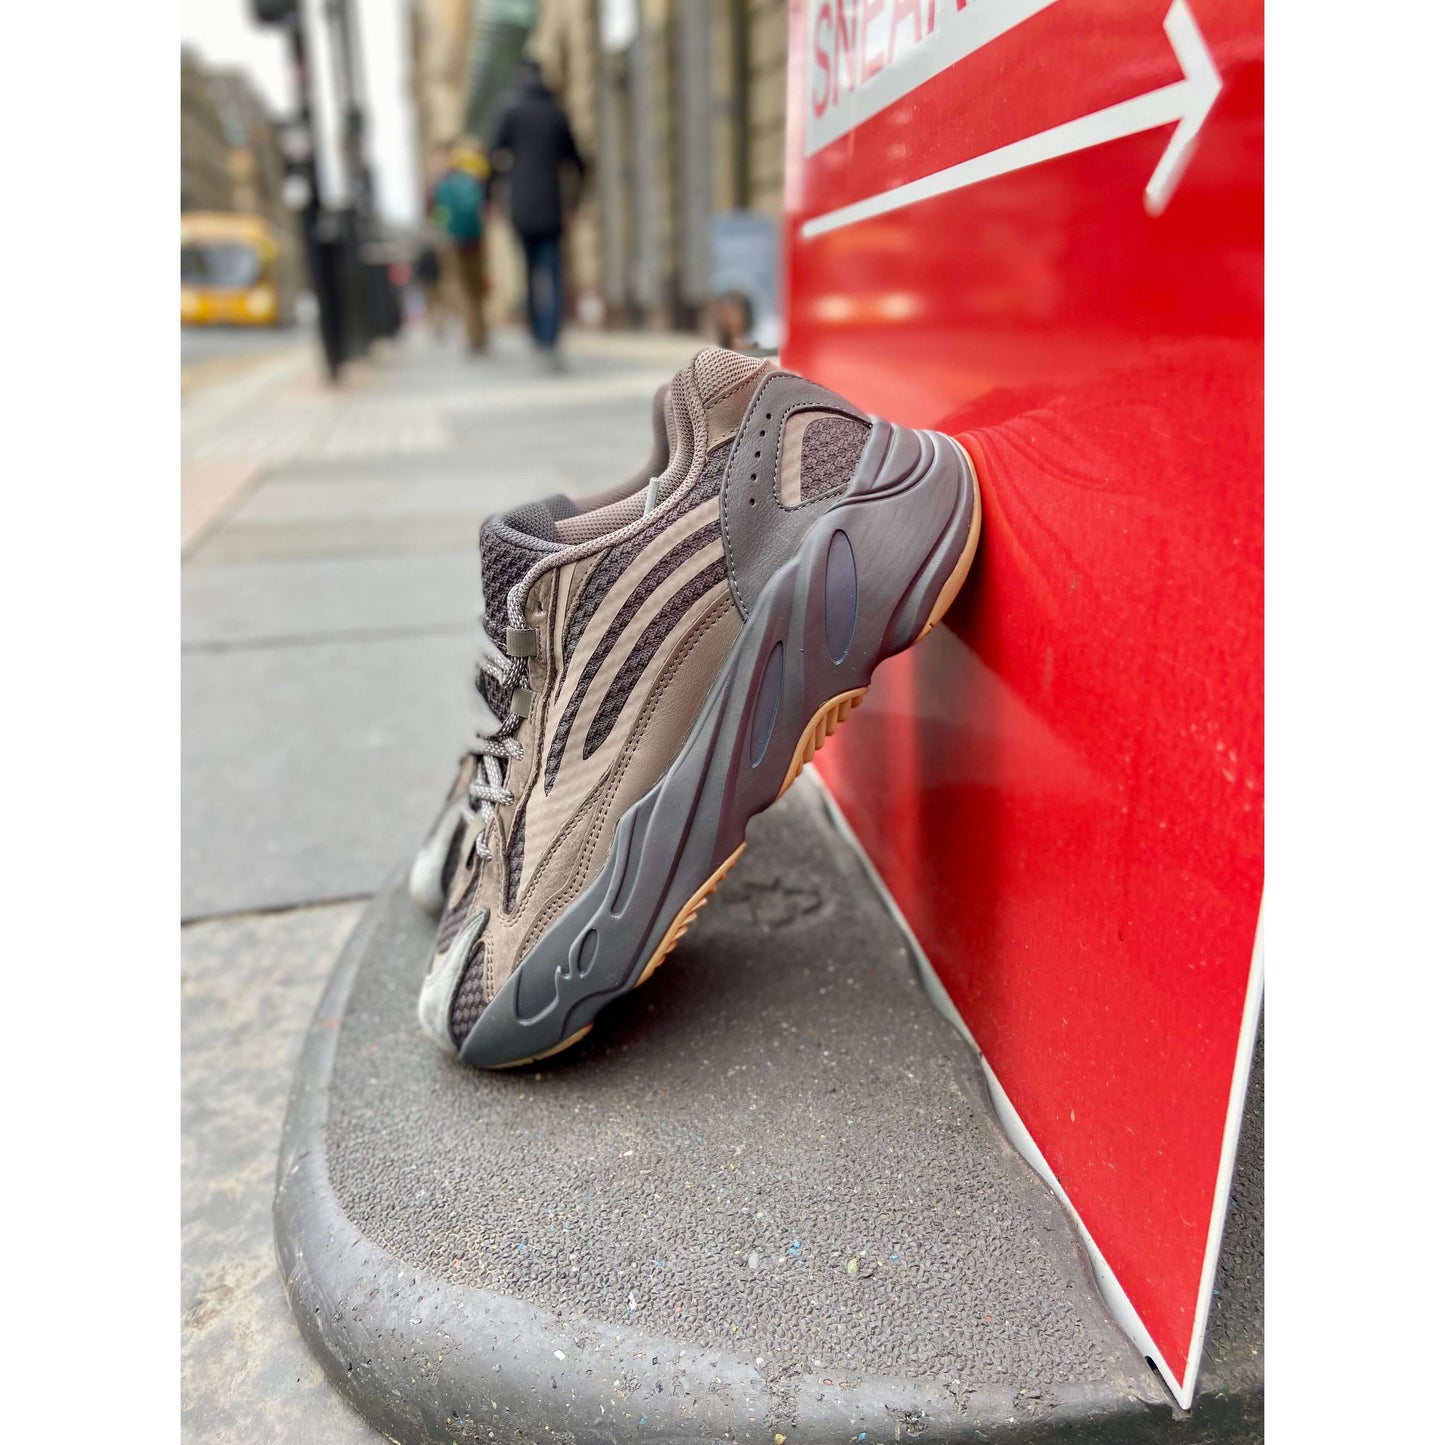 Adidas Yeezy Boost 700 V2 Geode from Yeezy